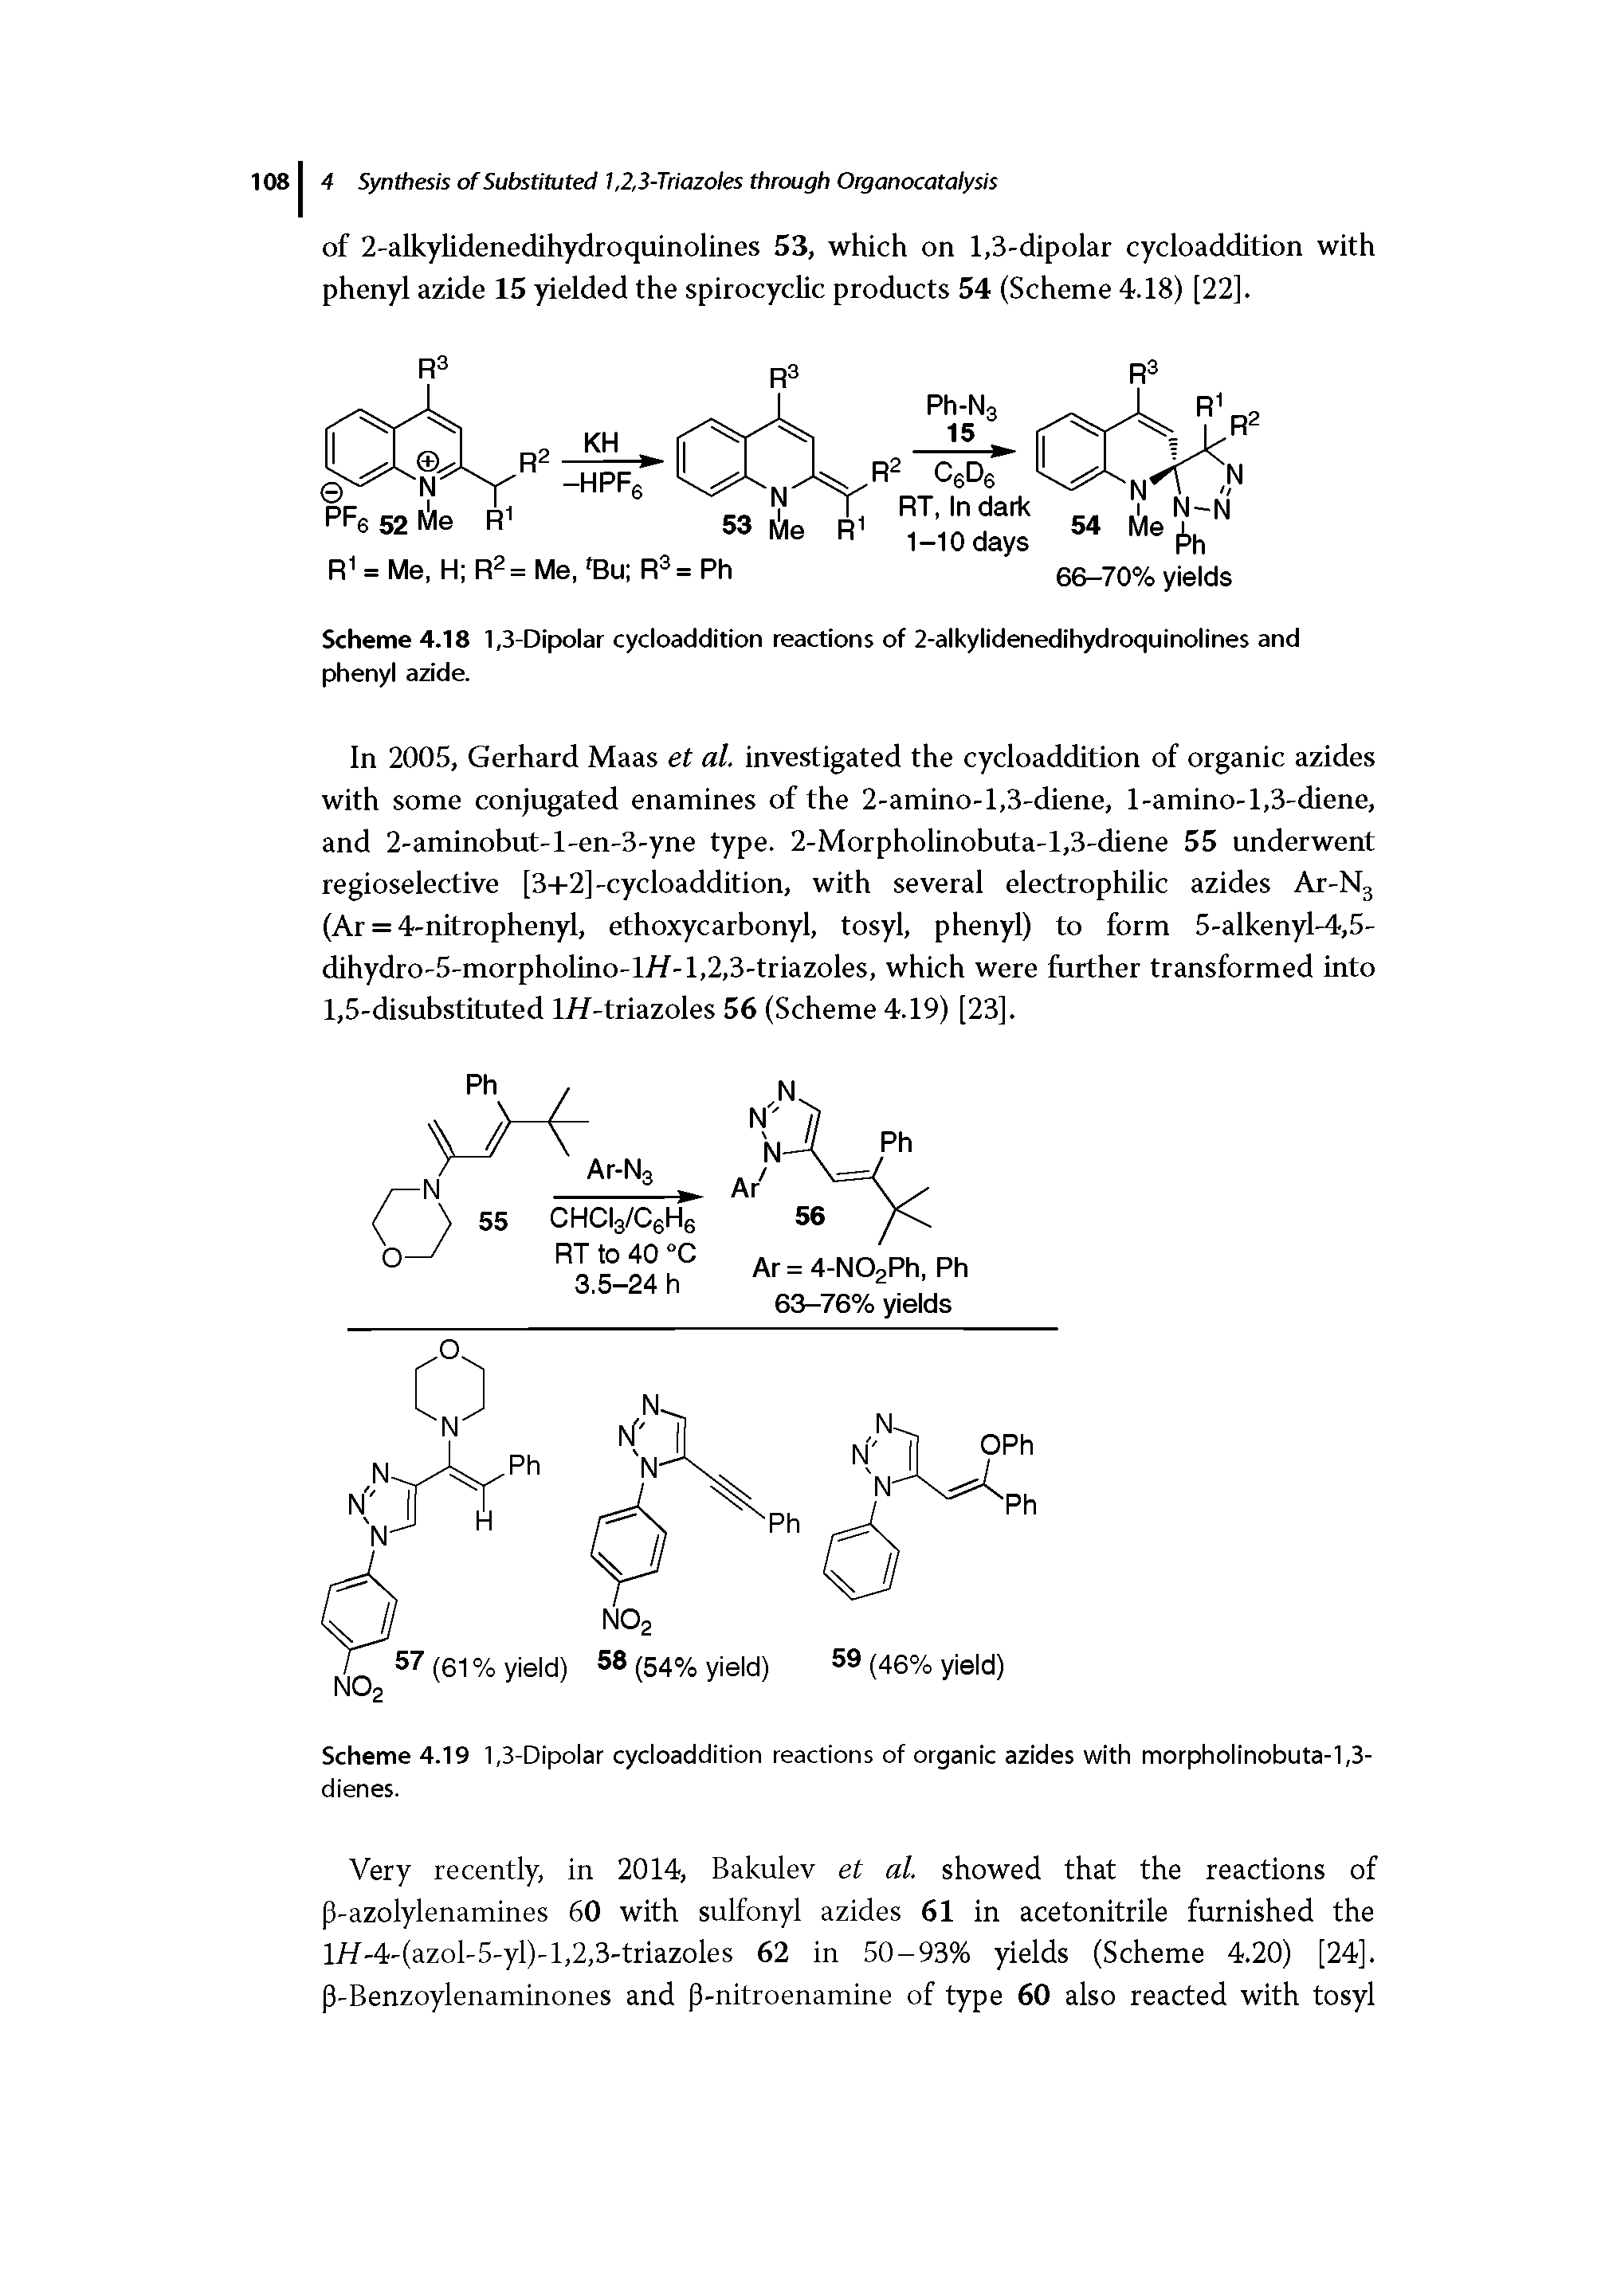 Scheme 4.19 1,3-Dipolar cycloaddition reactions of organic azides with morpholinobuta-1,3-dienes.